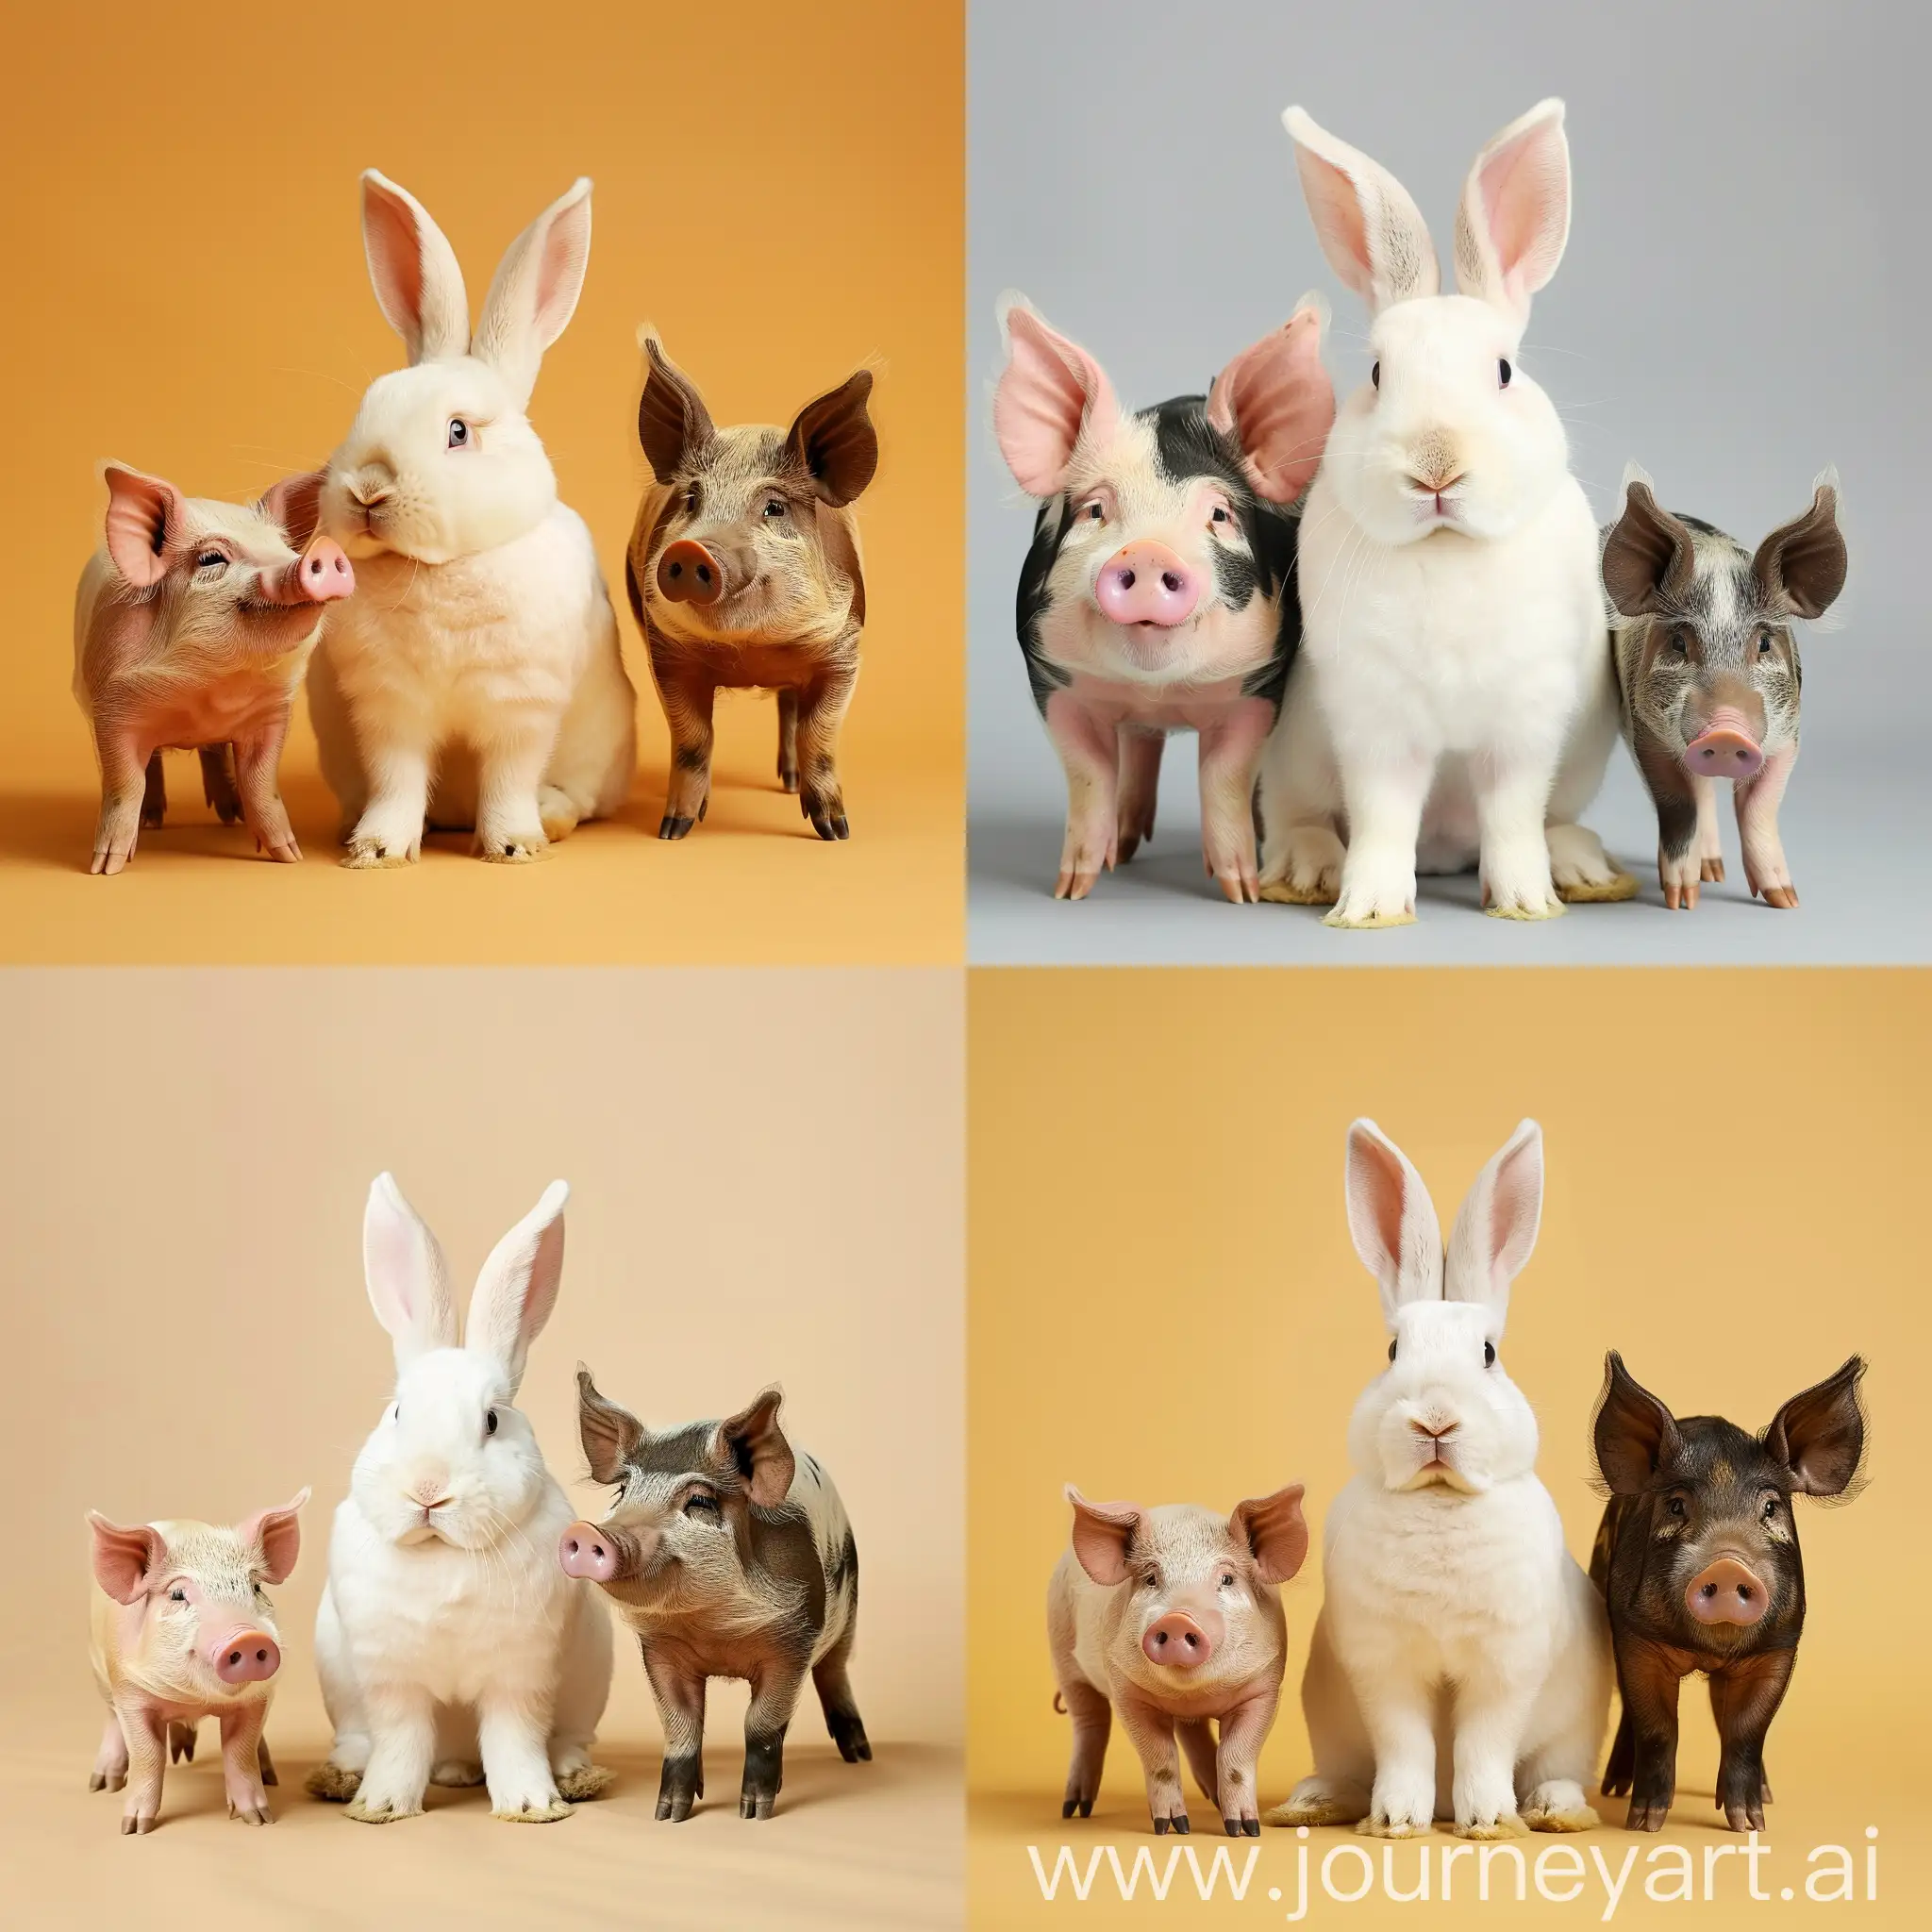 Adorable-White-Rabbit-with-Playful-Pink-and-Brown-Pigs